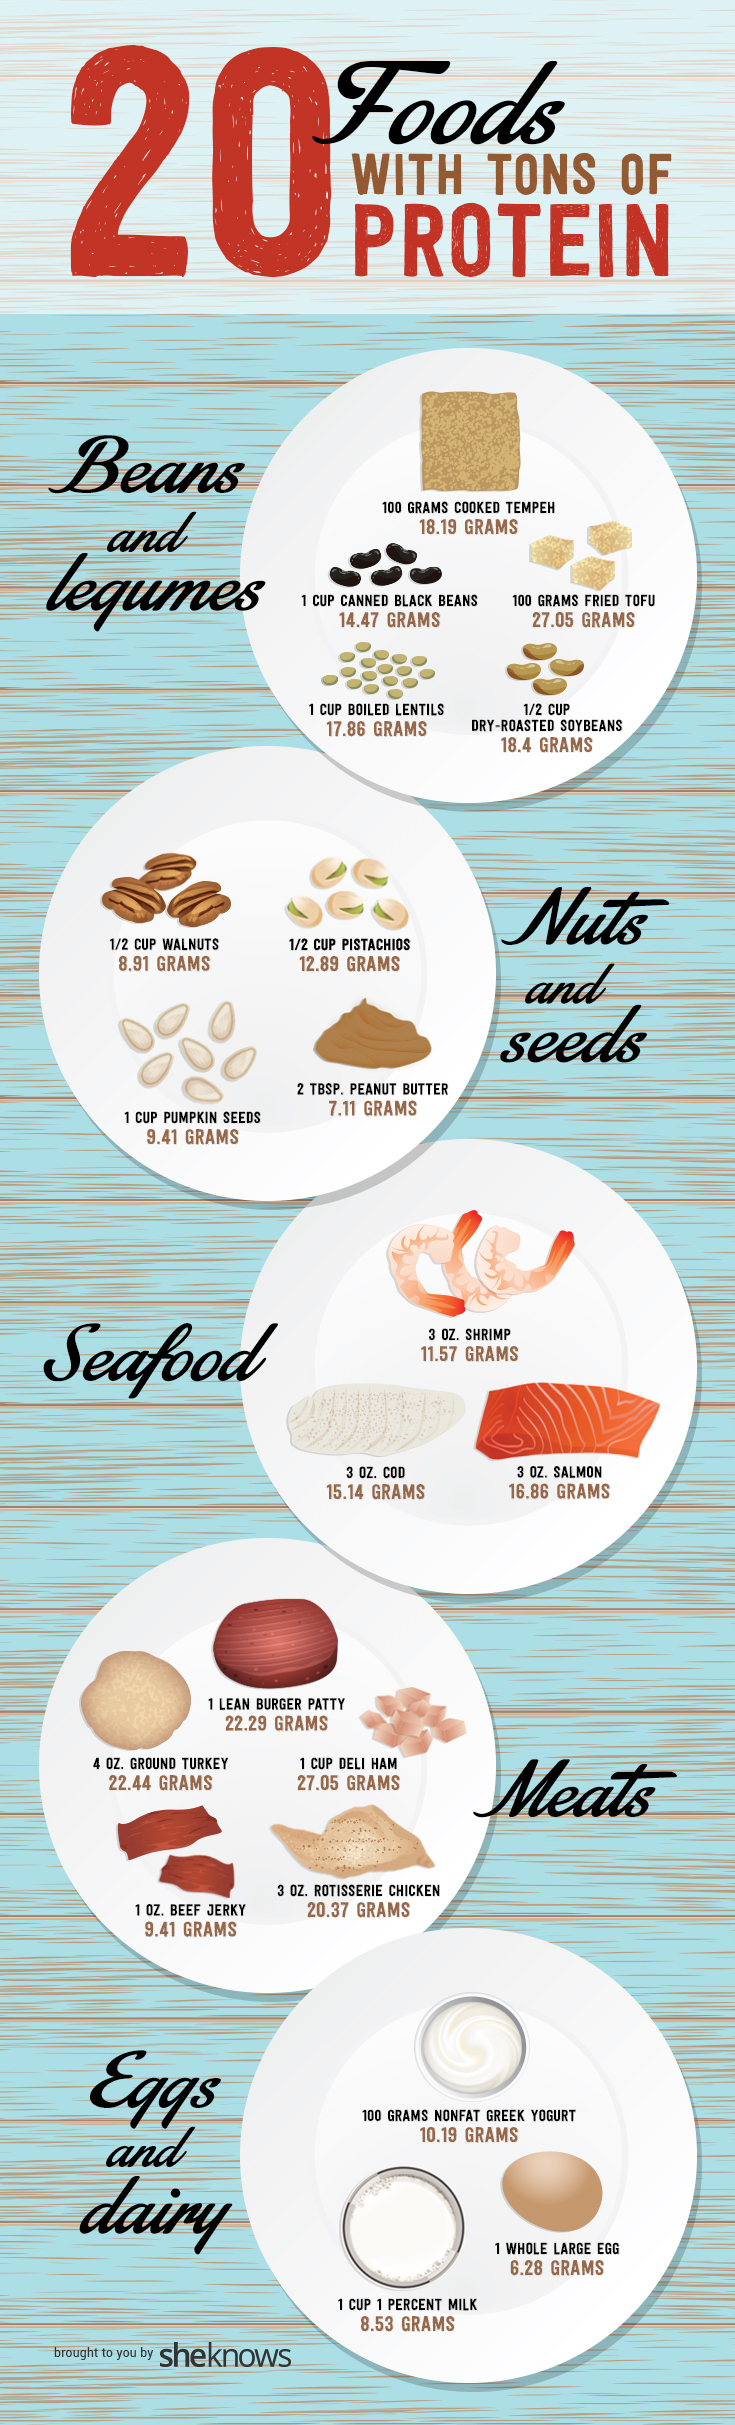 20 Protein-filled foods to snack on (INFOGRAPHIC)